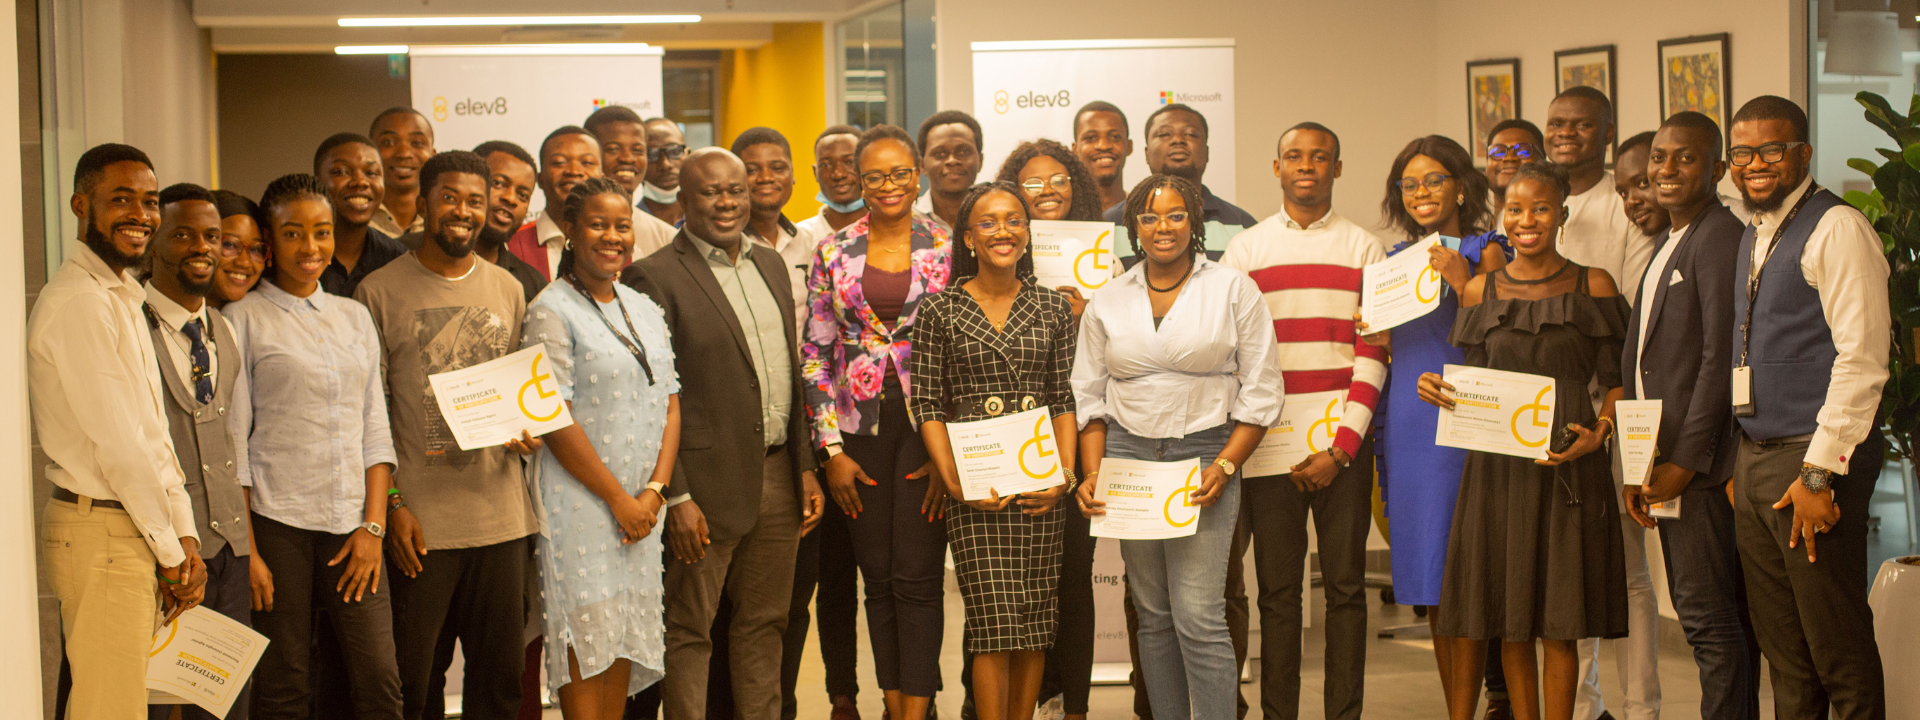 125 Learners from Across Nigeria Graduate from elev8 and Microsoft’s Software Development Career Progression Program